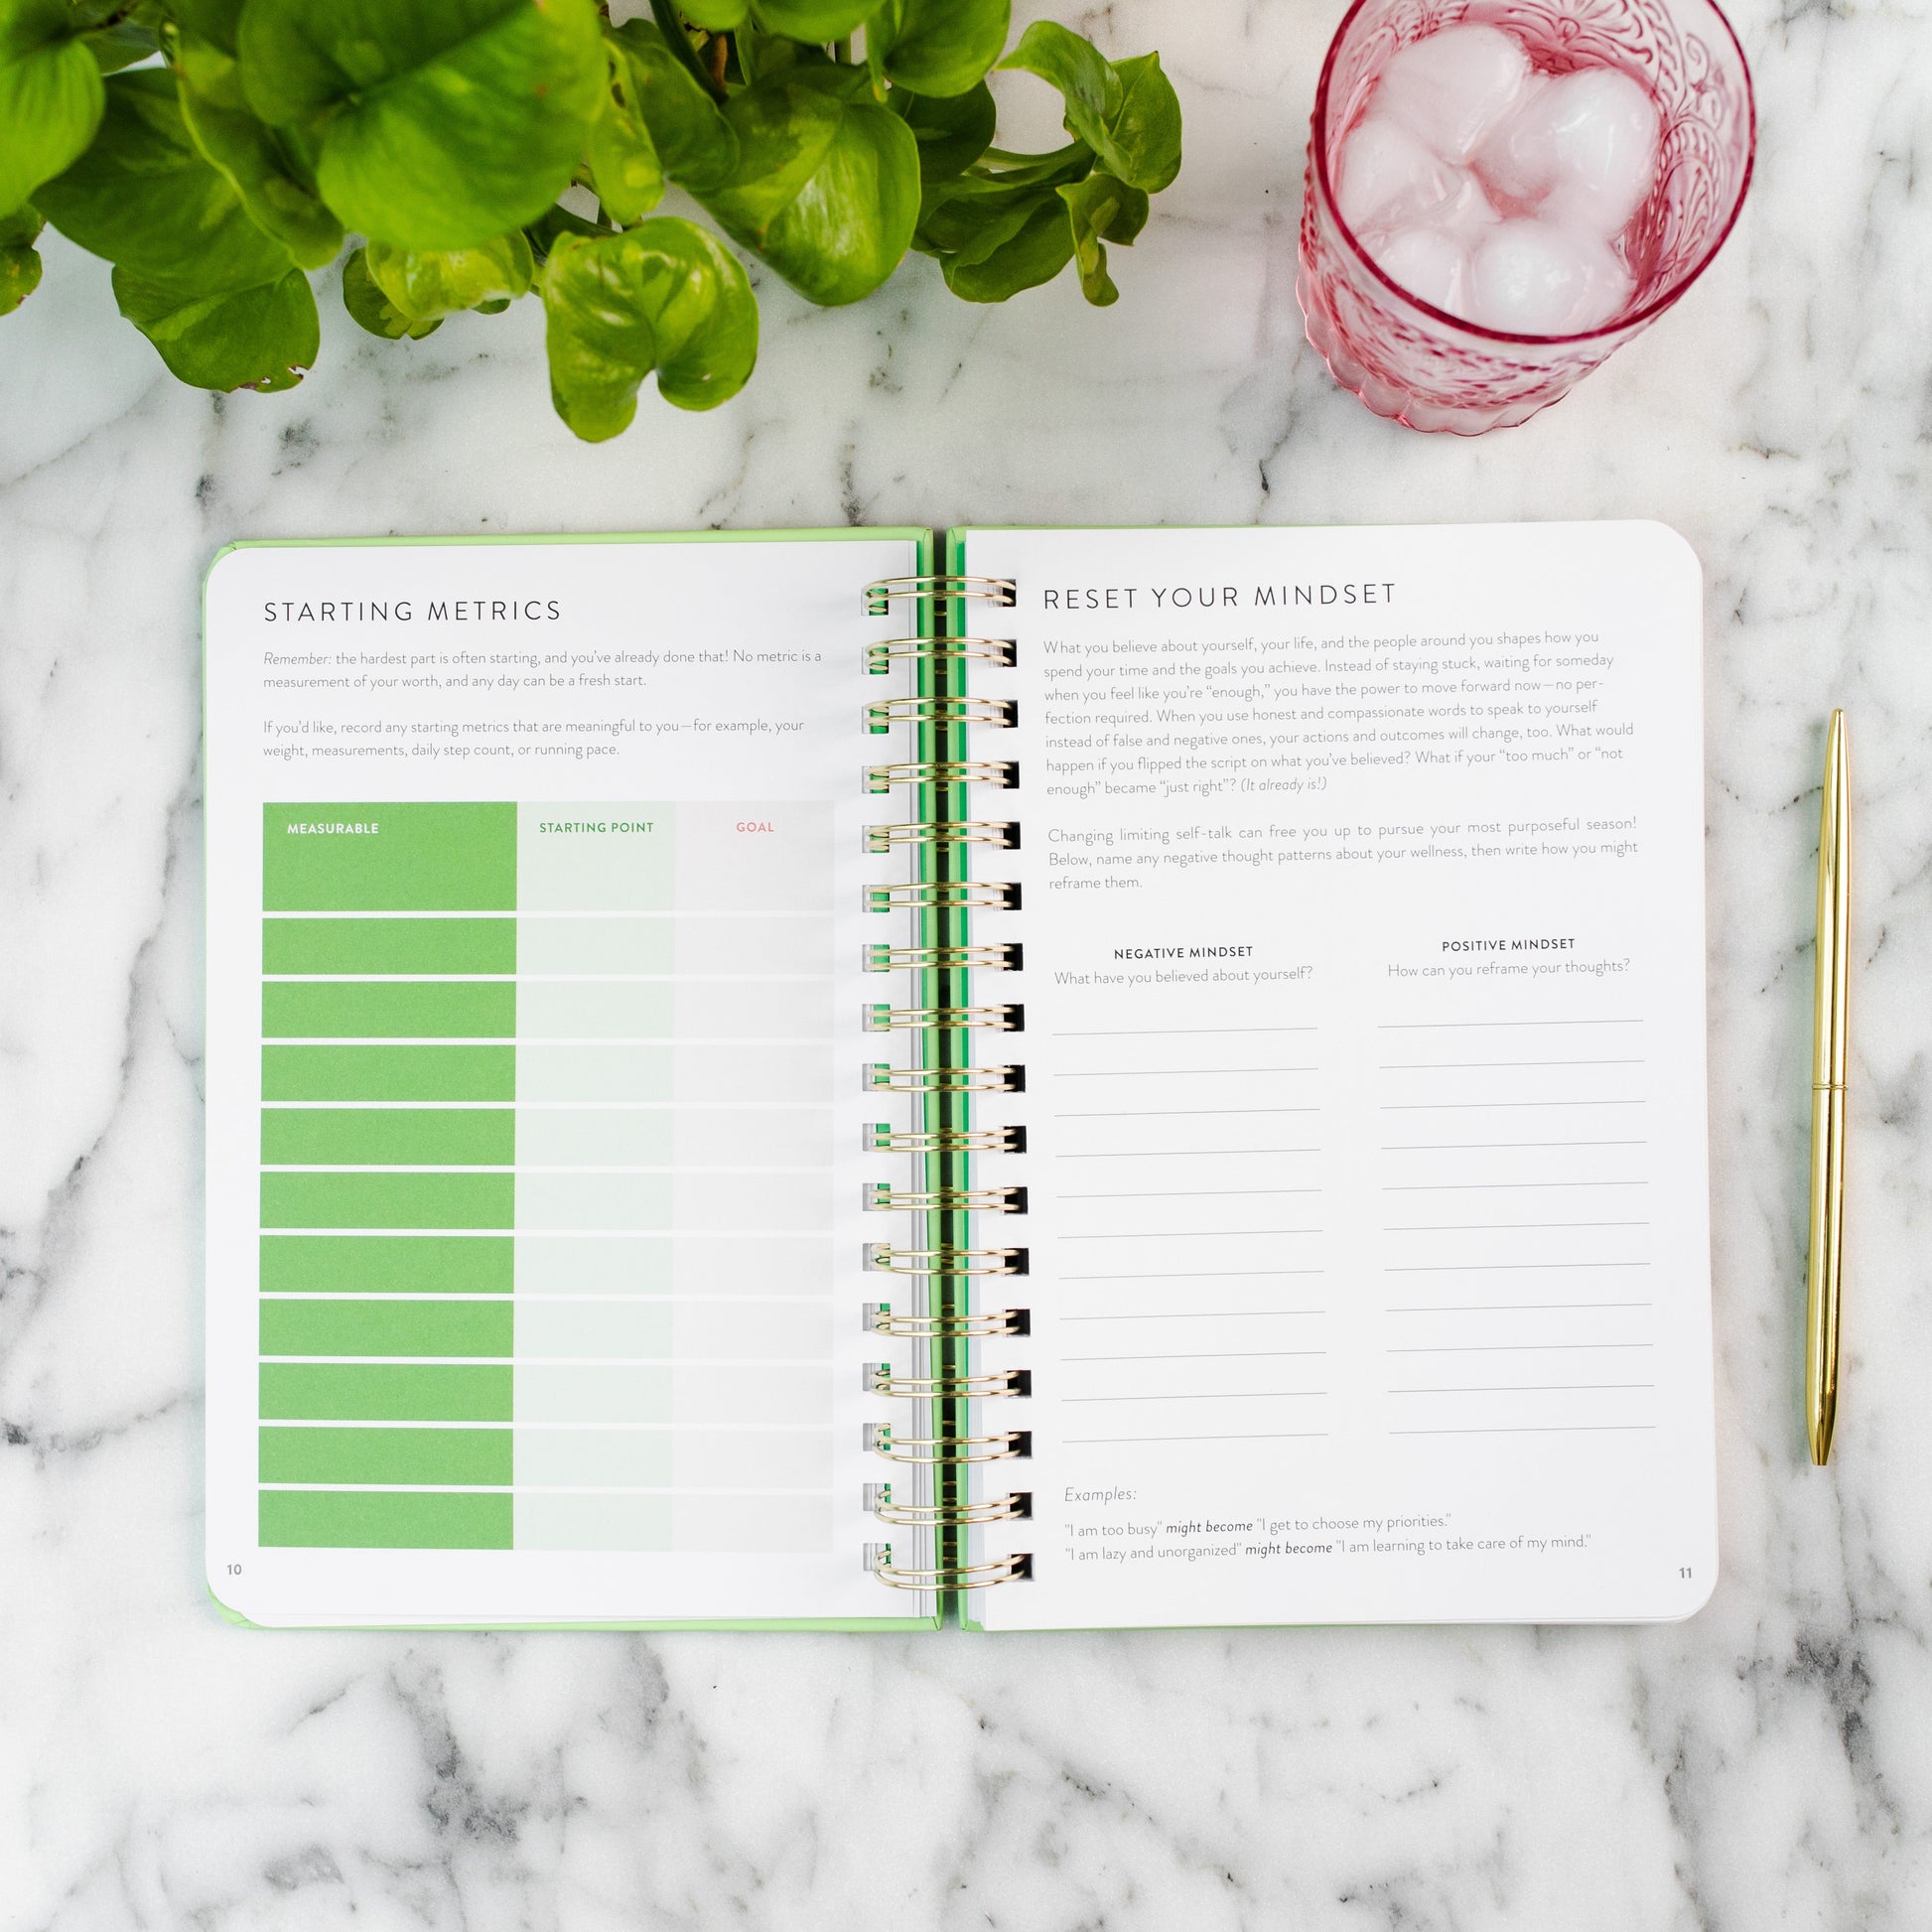 Wellness Journal by Cultivate